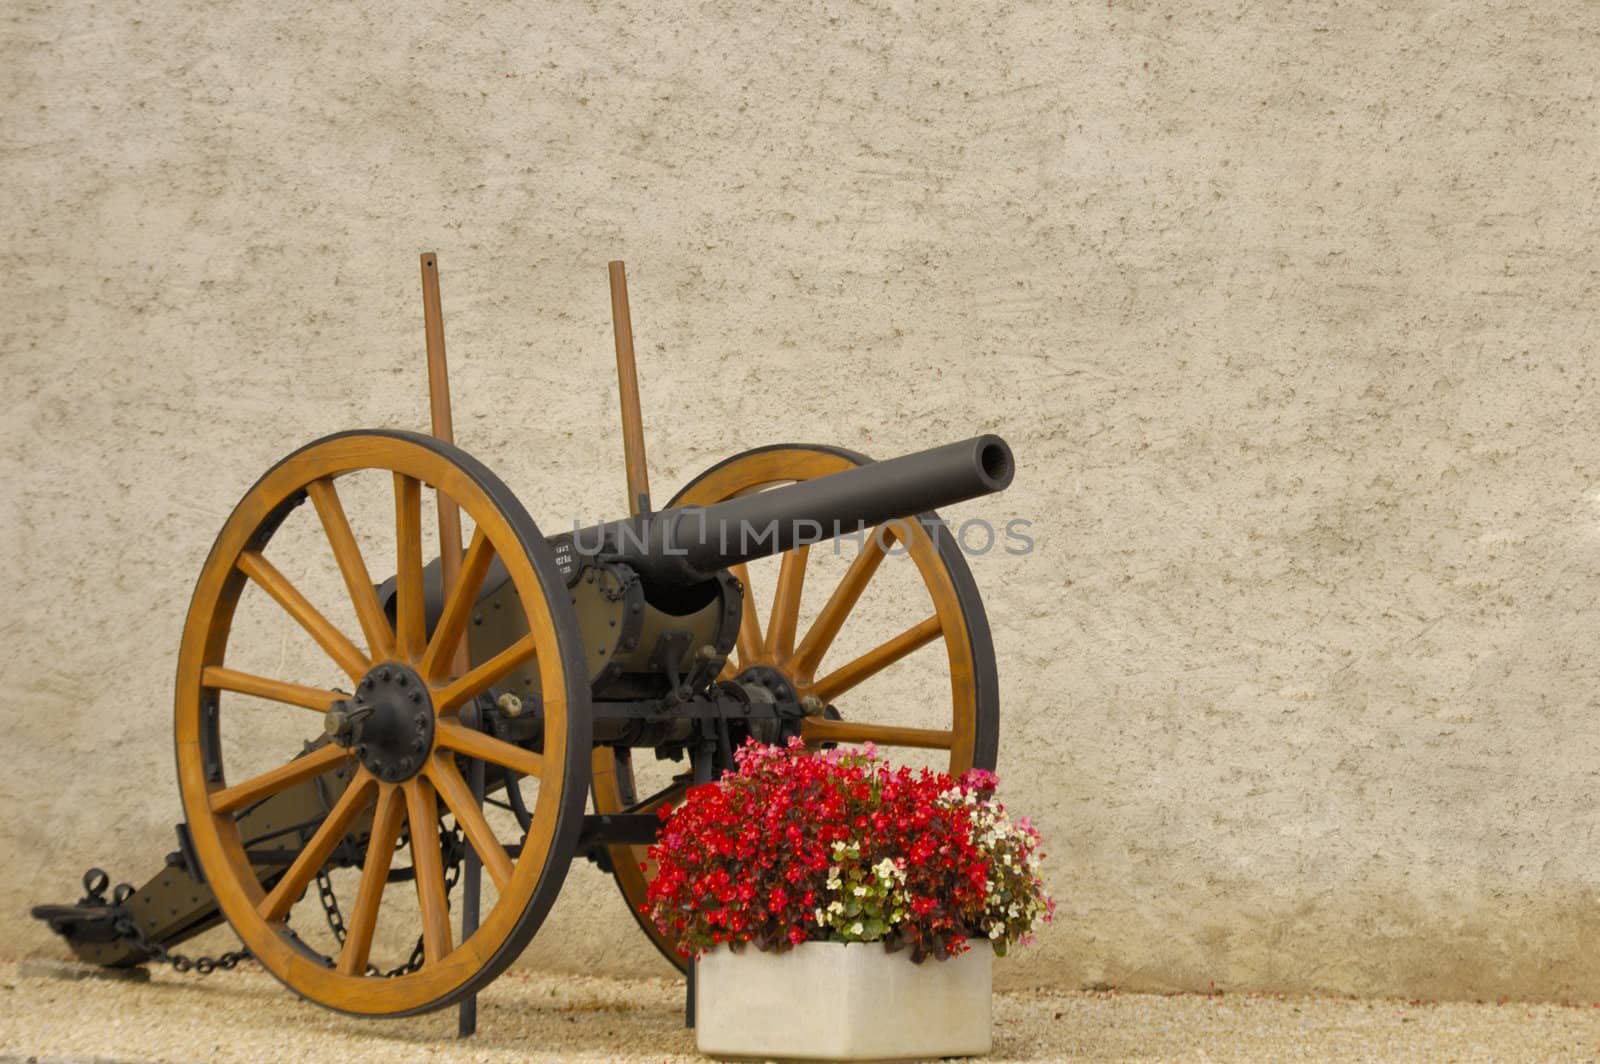 An old cannon outside a castle in Switzerland, guarding a tub of begonias.